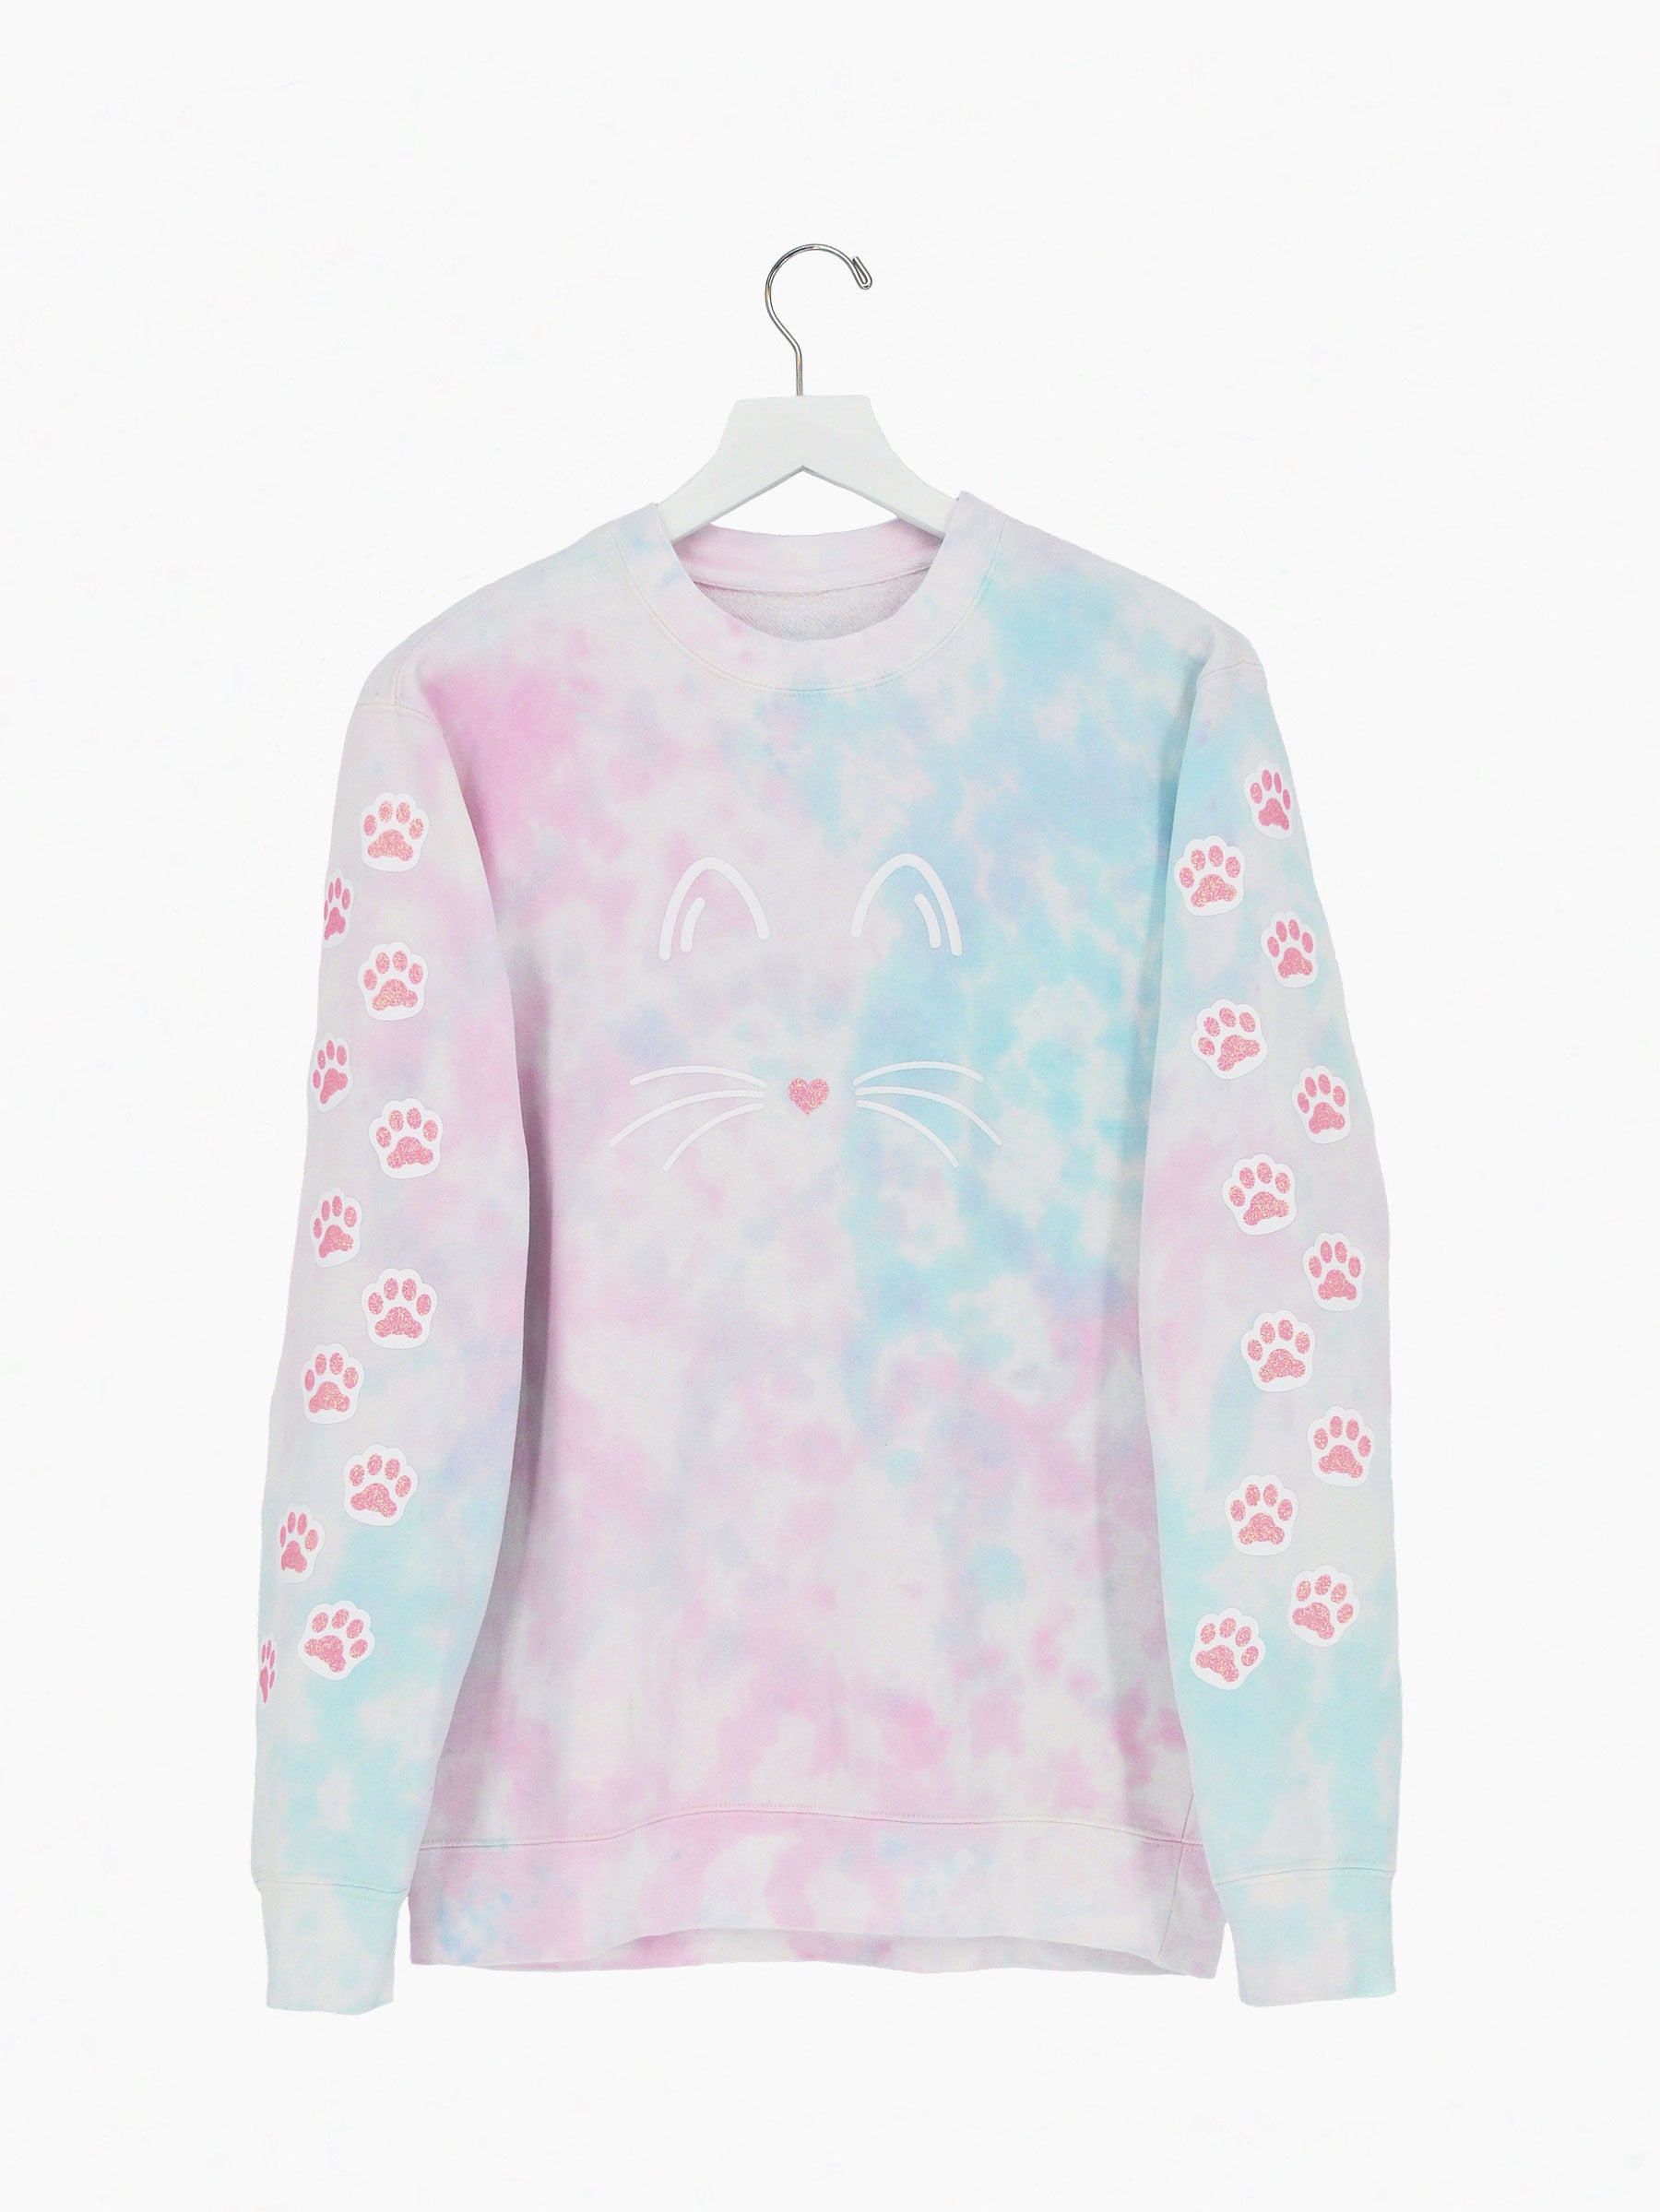 Pink and blue tie dye crewneck with white and pink cat paws on sleeve.  Cat face outline on front.